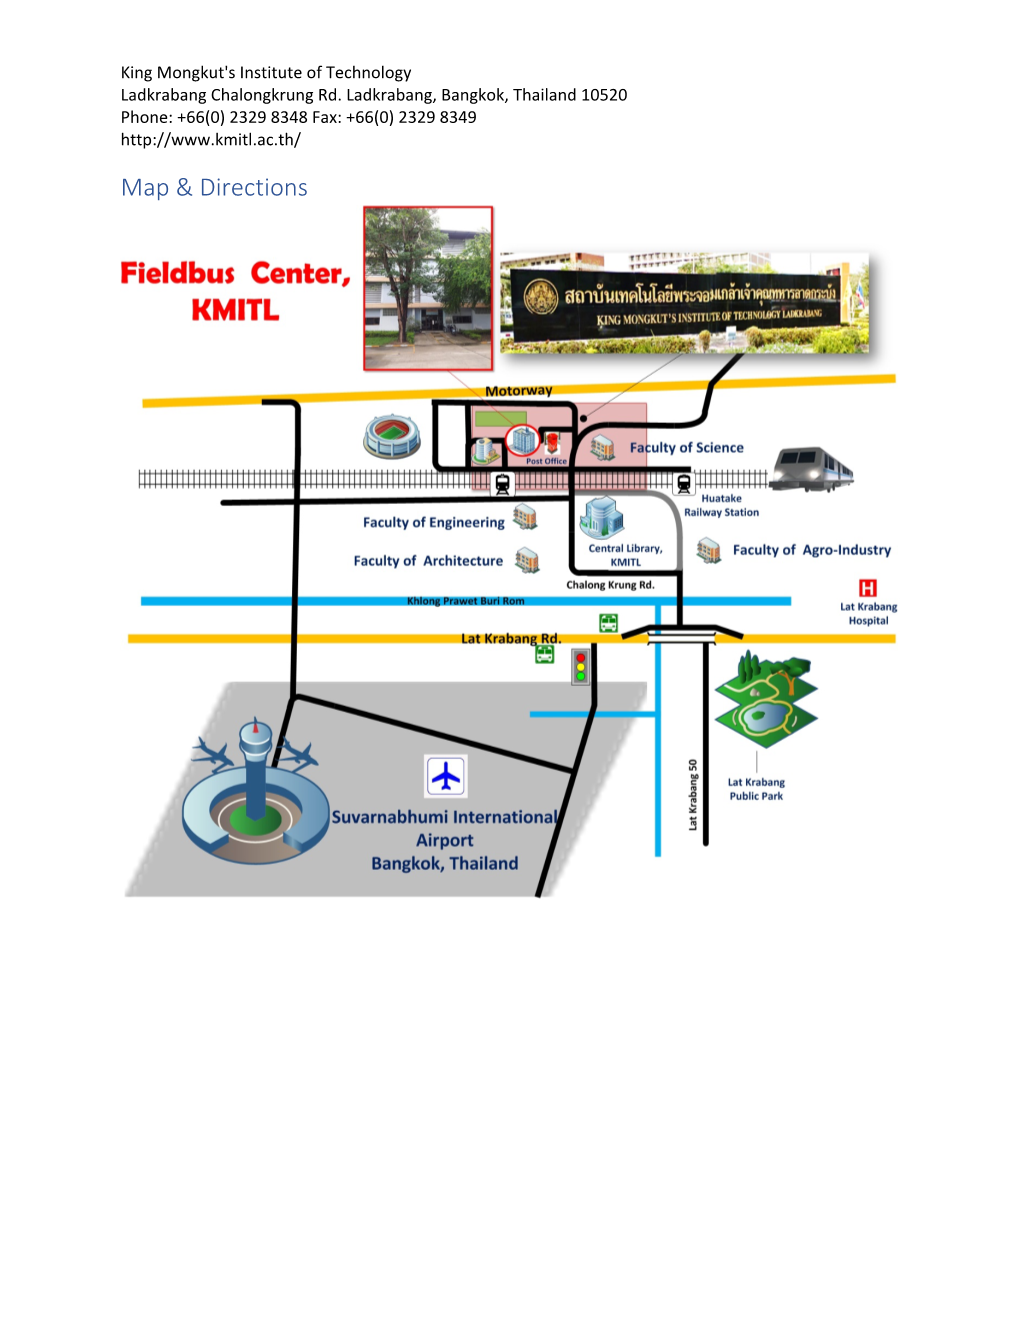 KMITL Map & Directions